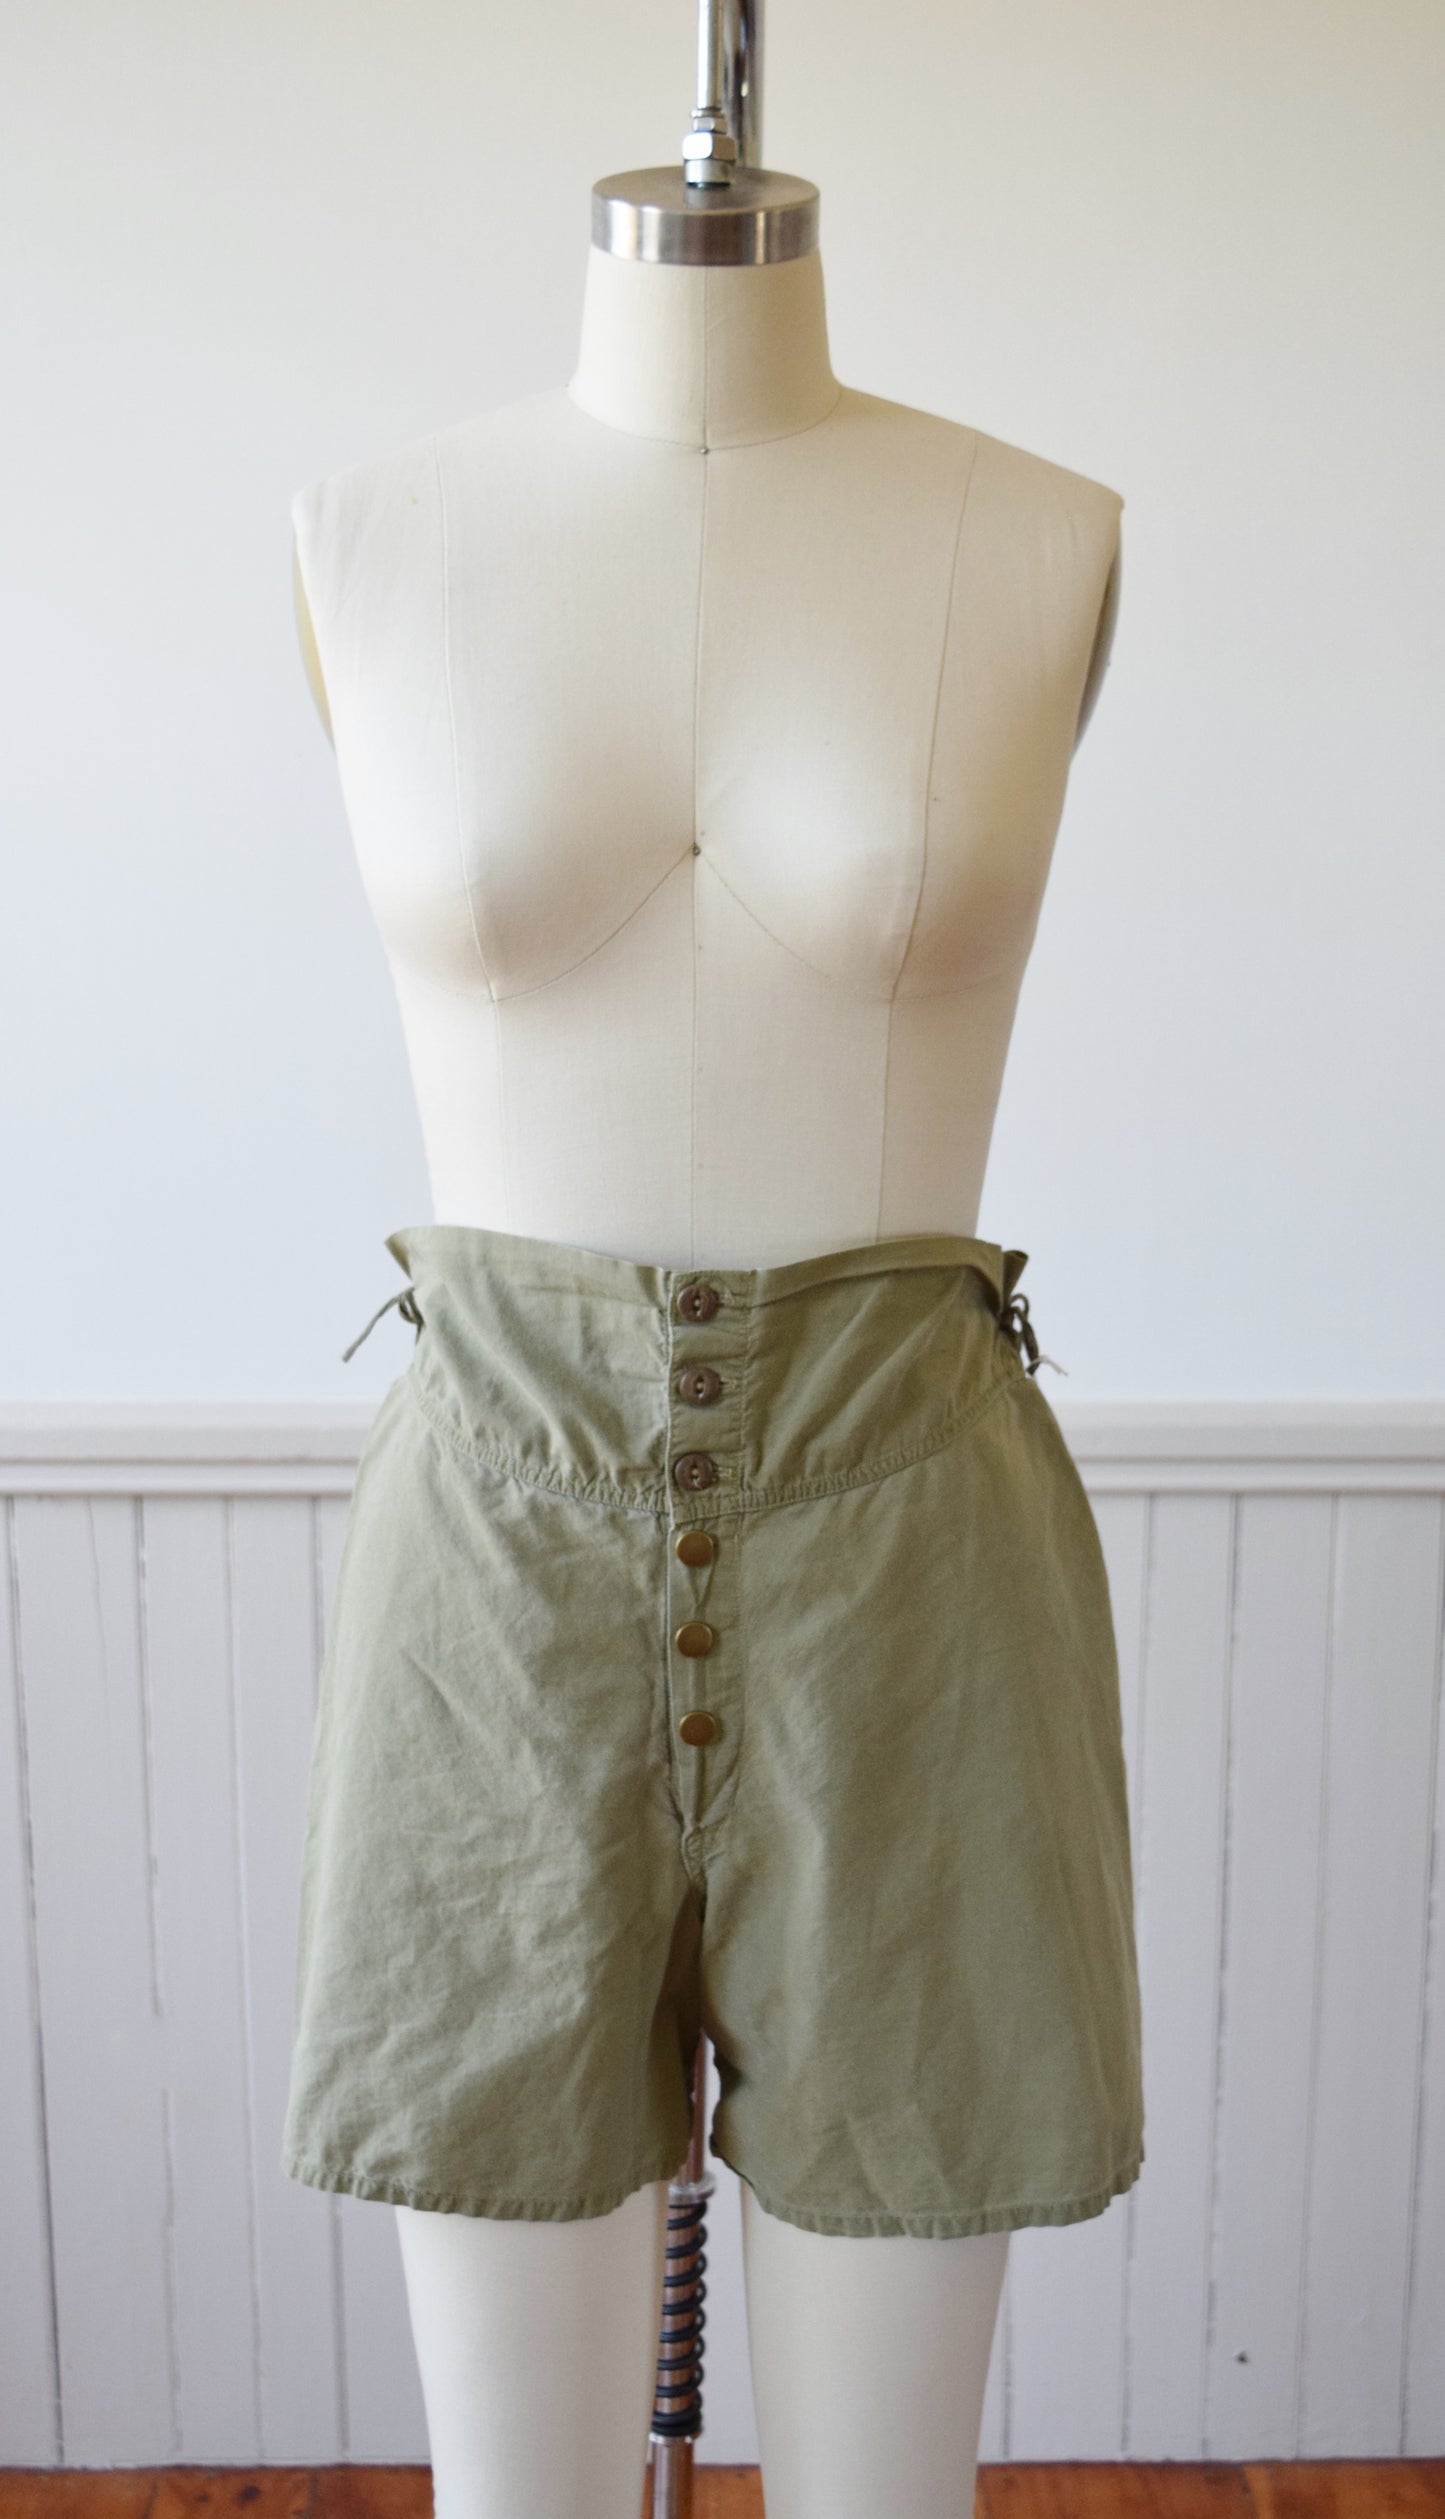 Army Issue Boxer Shorts | 1940s | 5 | S/M